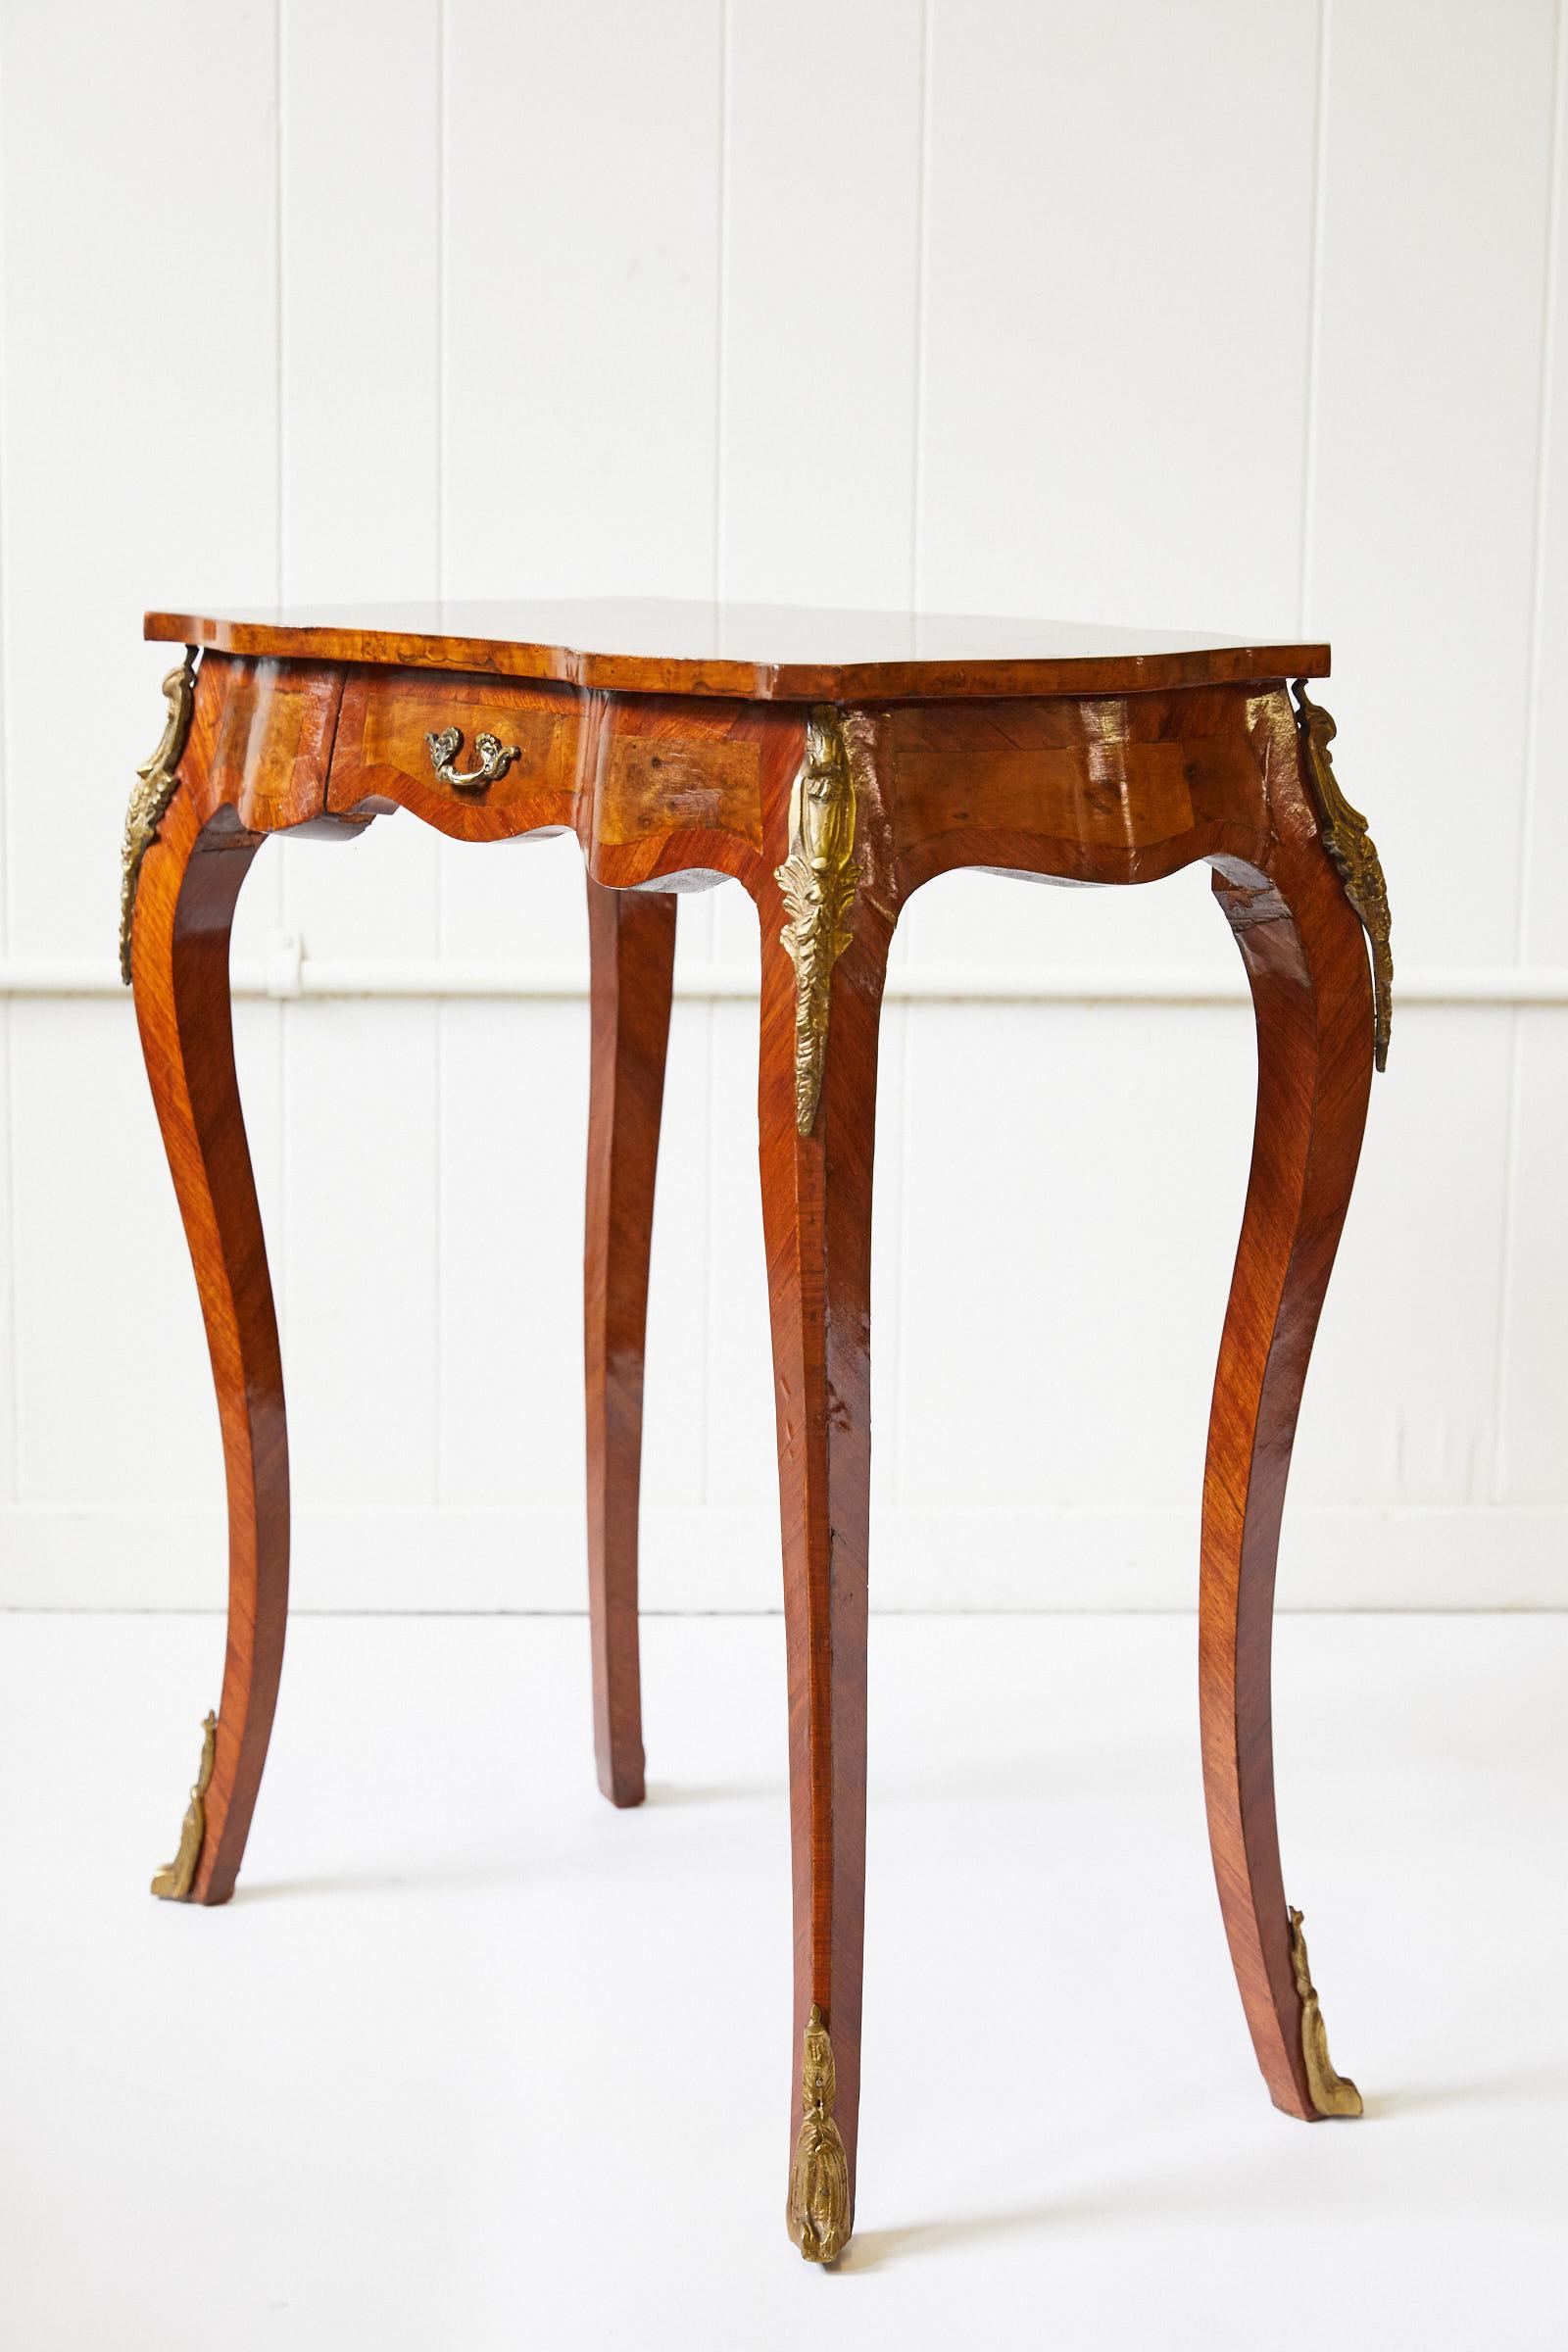 Late 19th century Italian side table of burl walnut and rosewood having a beautifully shaped top inset with a star marquetry inlay. The table is finished on all sides; the sides and back taking a serpentine form while the front has an oxbow shape.